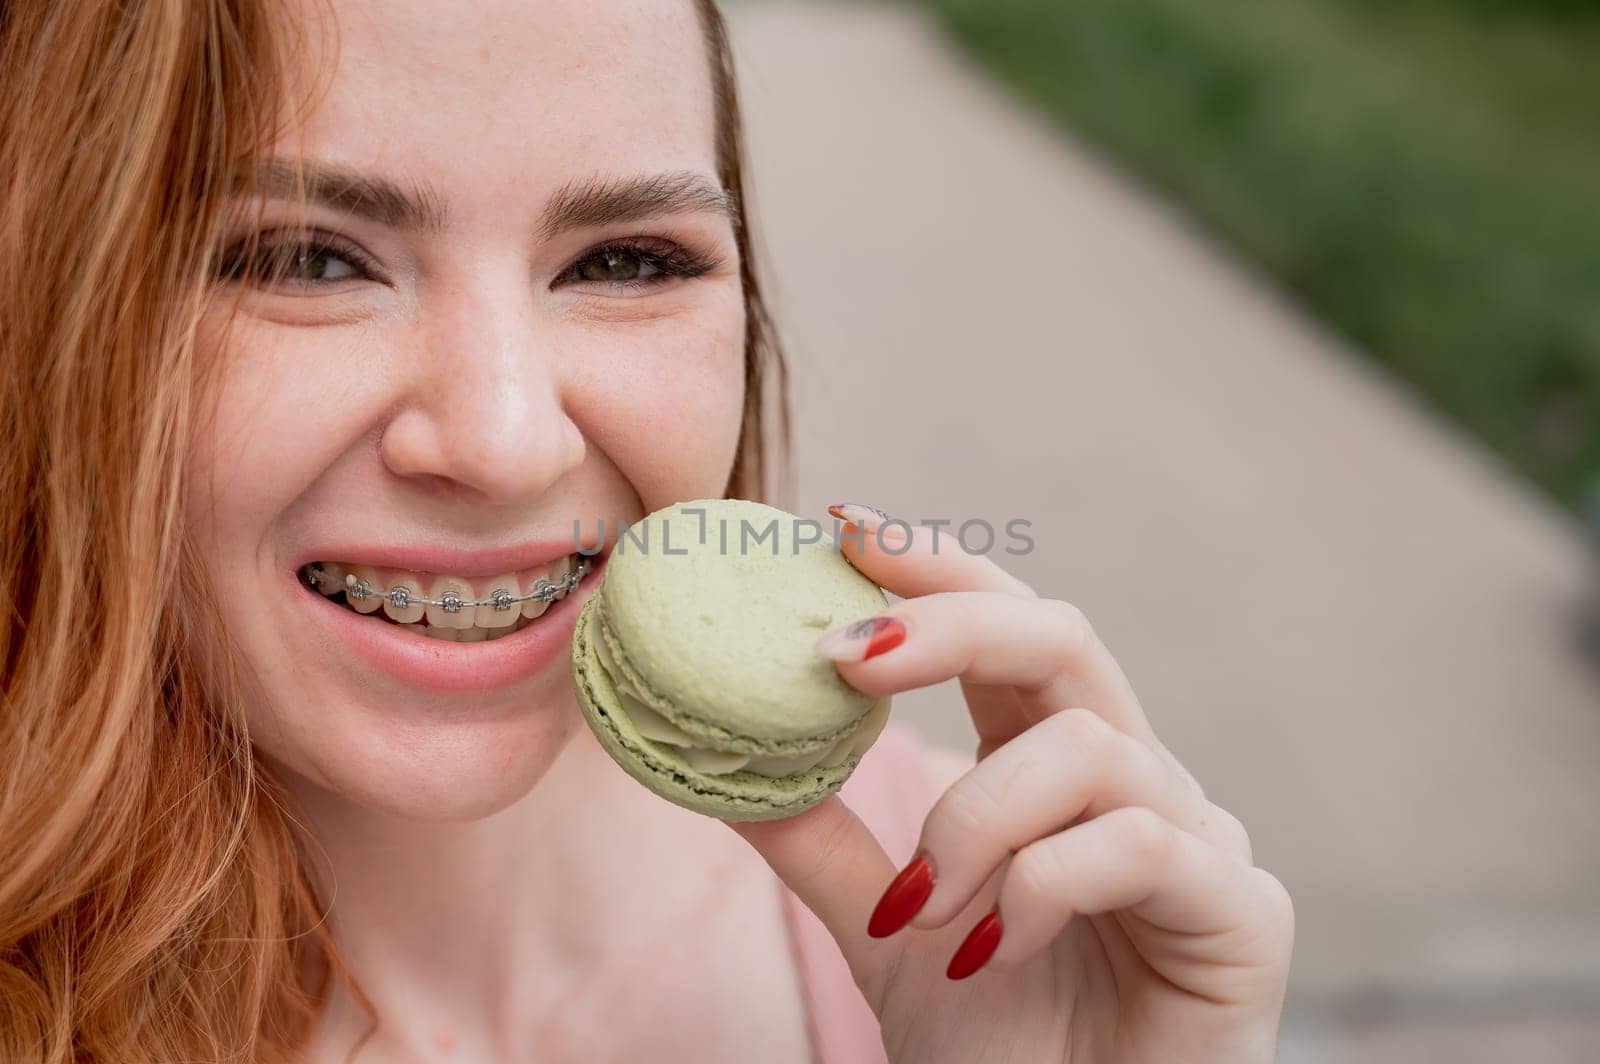 Young red-haired woman with braces eating macaron cake. by mrwed54